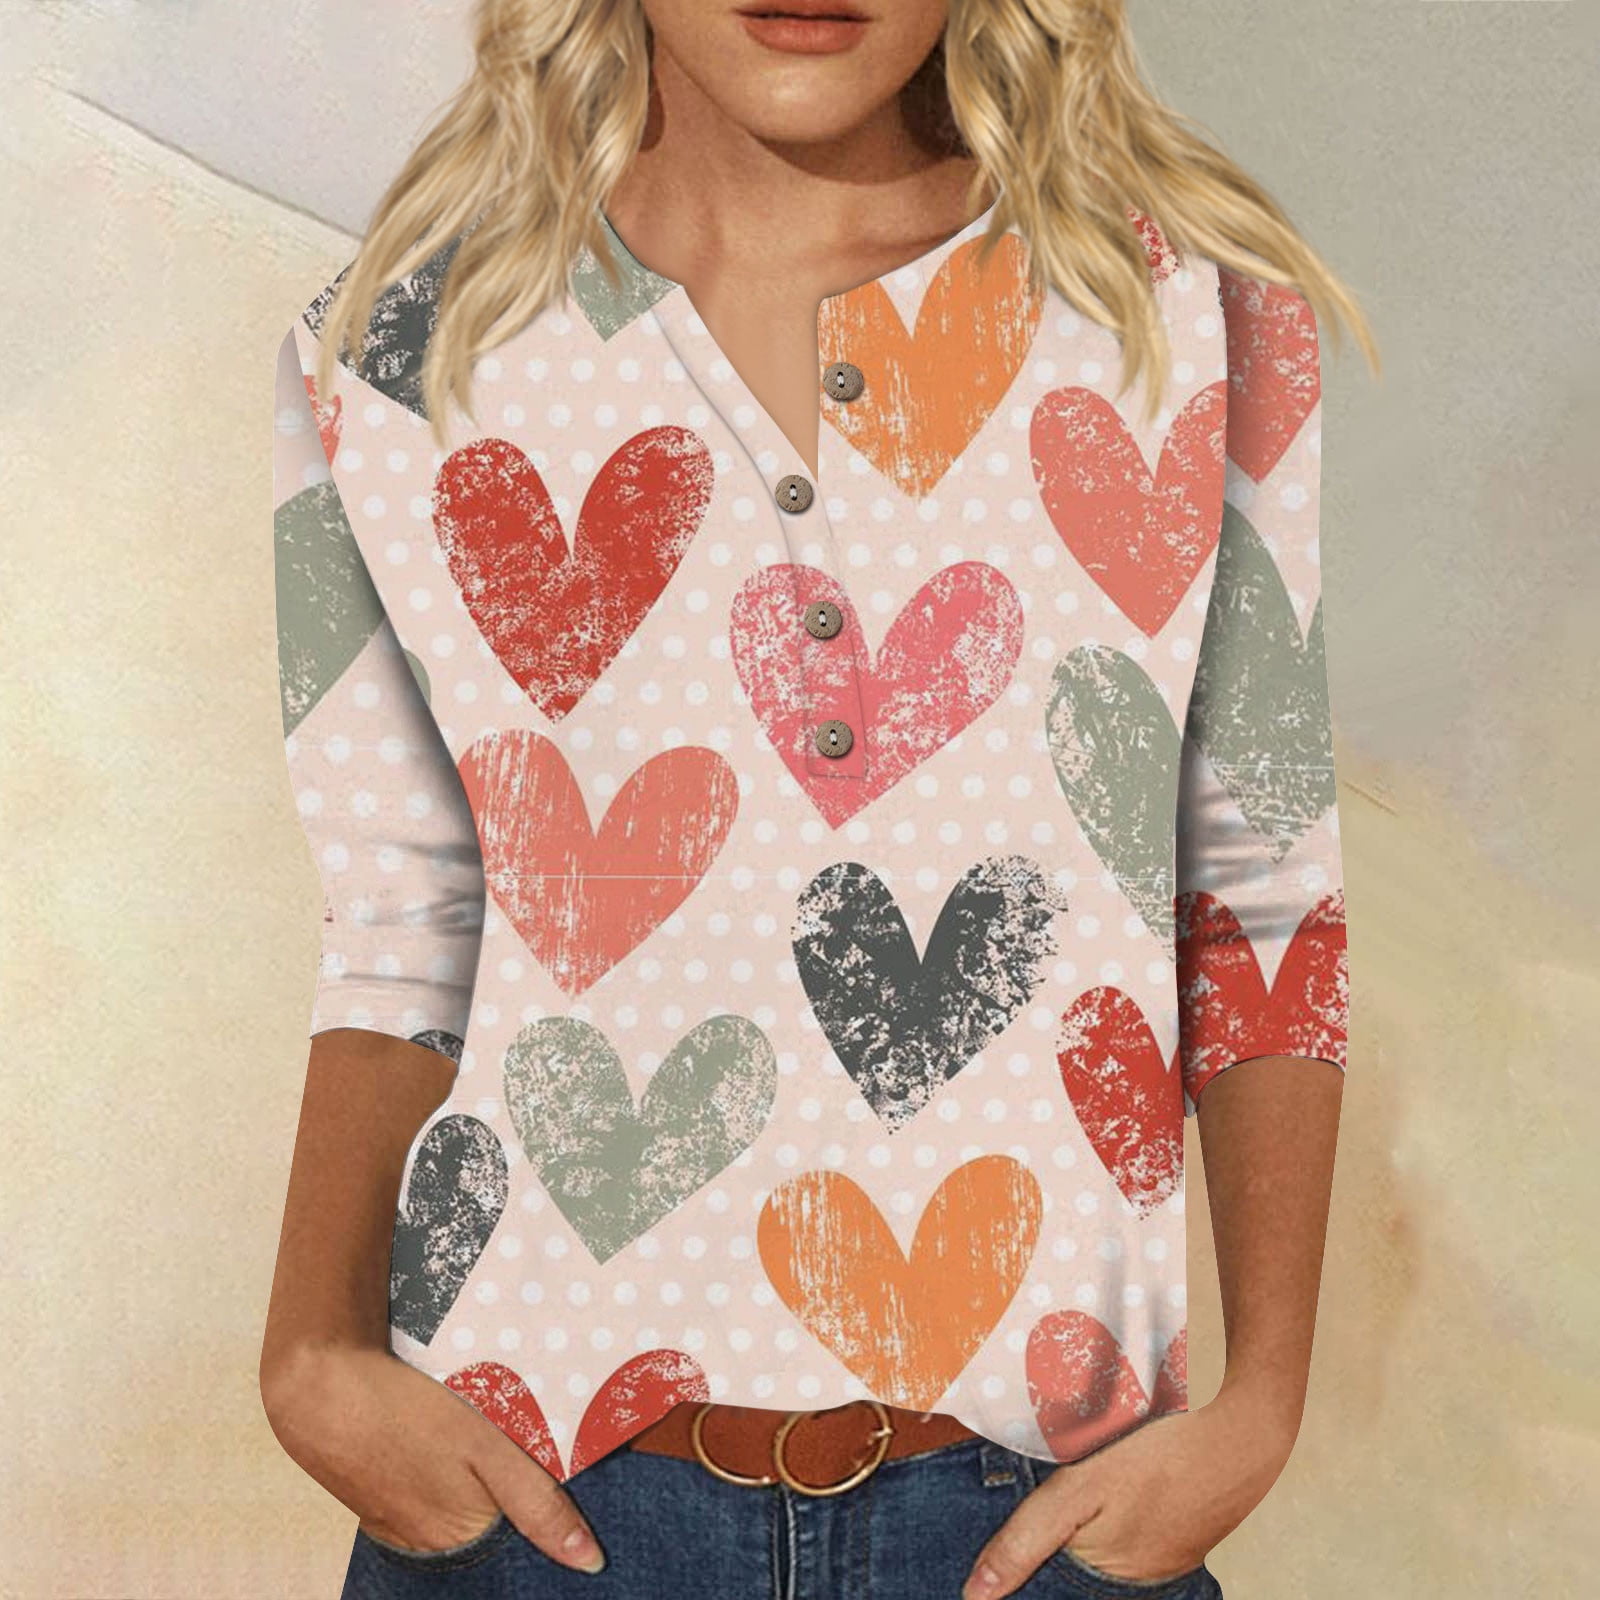 Act Now! Gomind Heart Sweater Women's Fashion Valentine's Day Printed ...